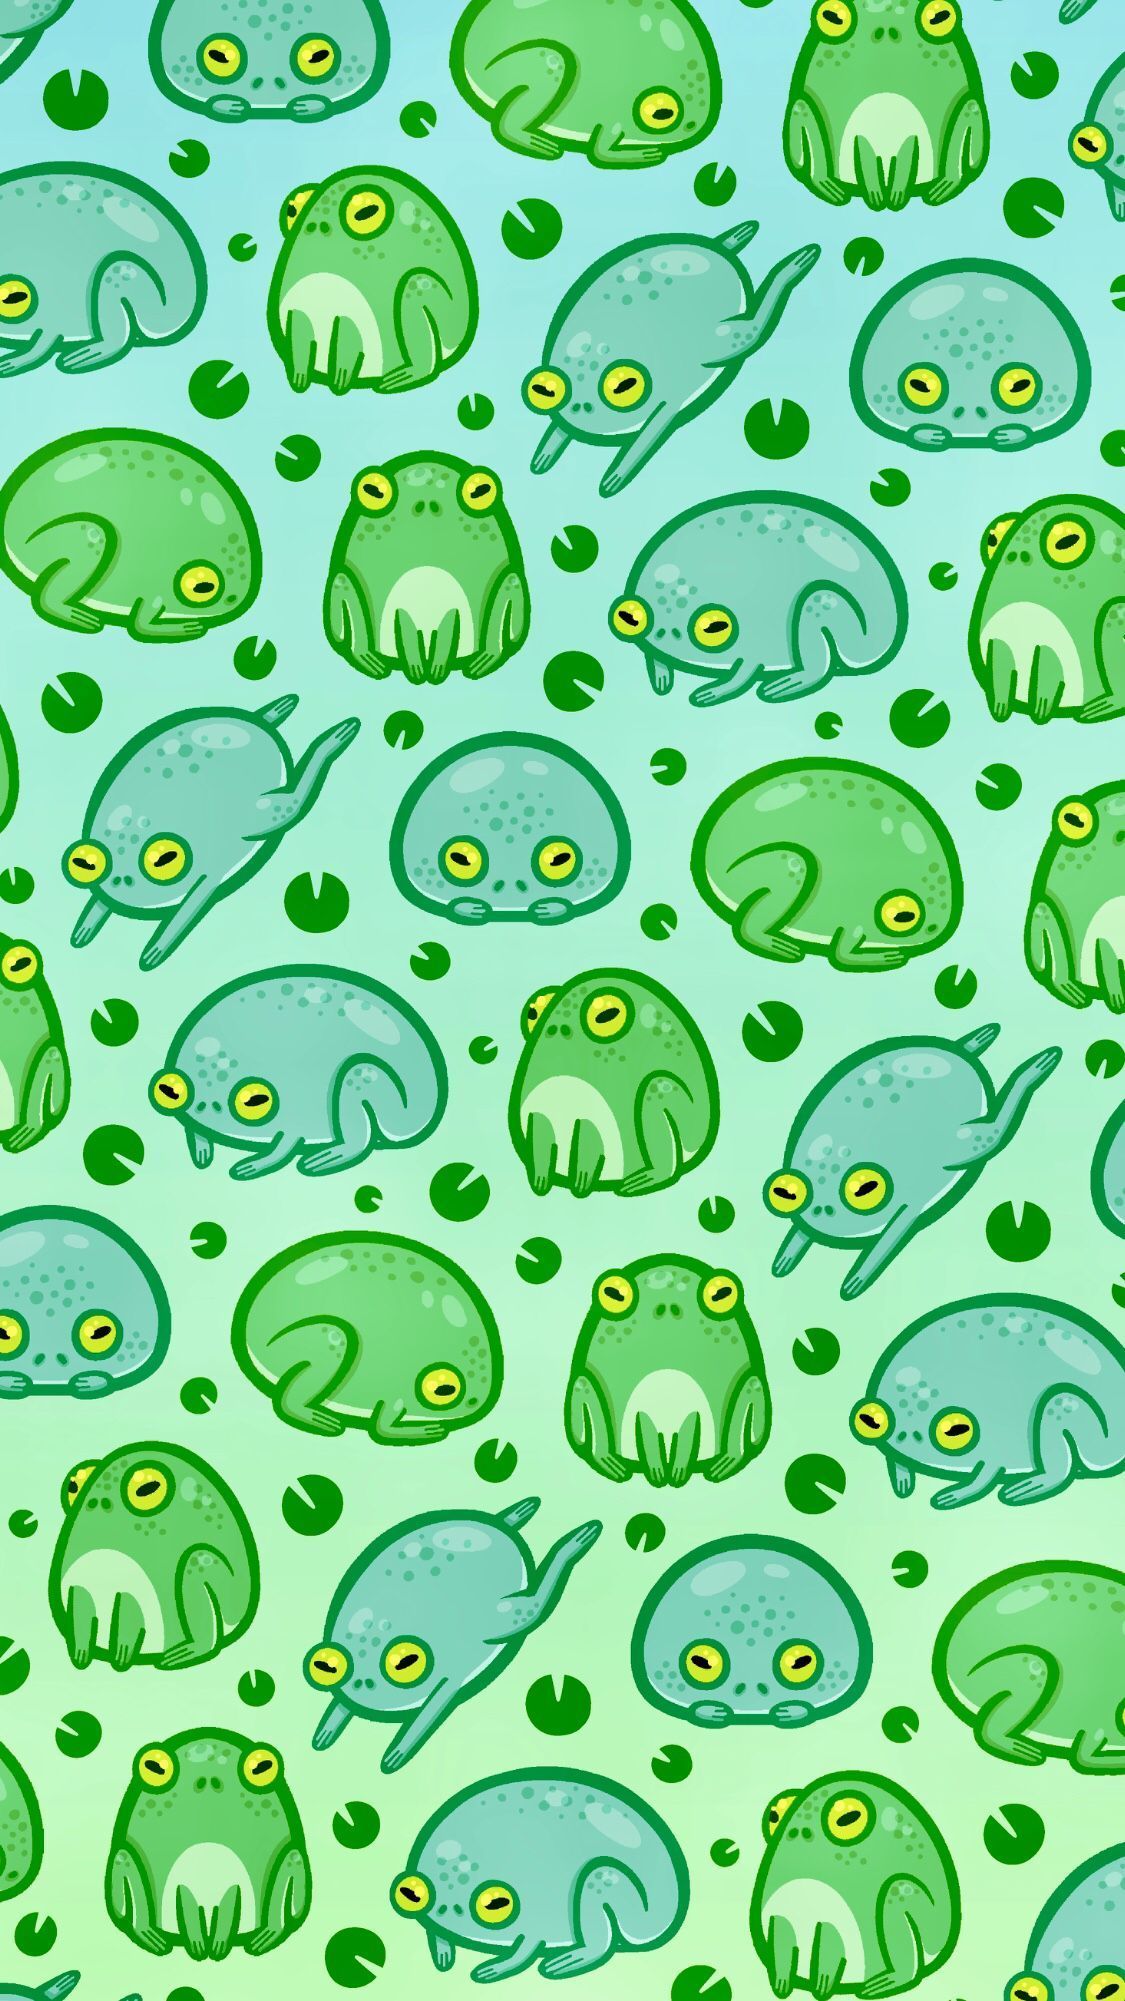 Frog Aesthetic Wallpaper Pc / Aesthetic Frog Wallpapers Wallpaper Cave